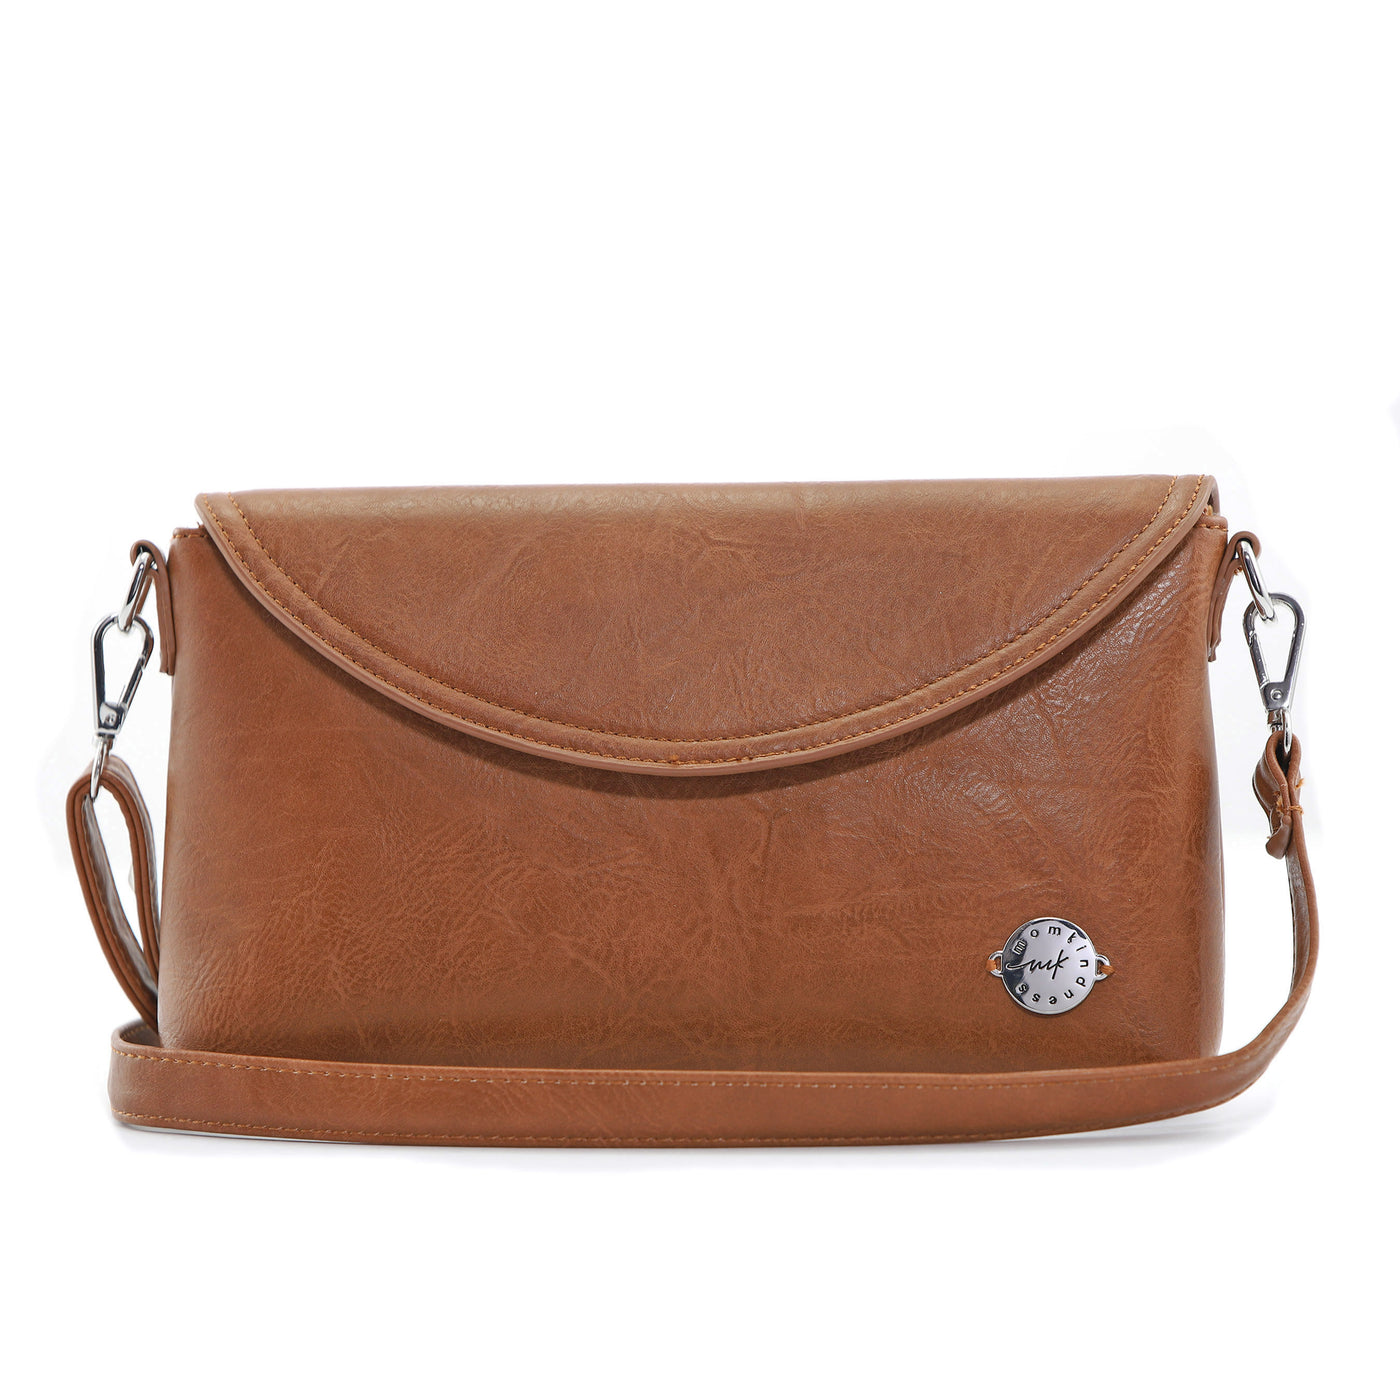 A caramel brown vegan leather clutch with removable crossbody strap, sitting on a white background.